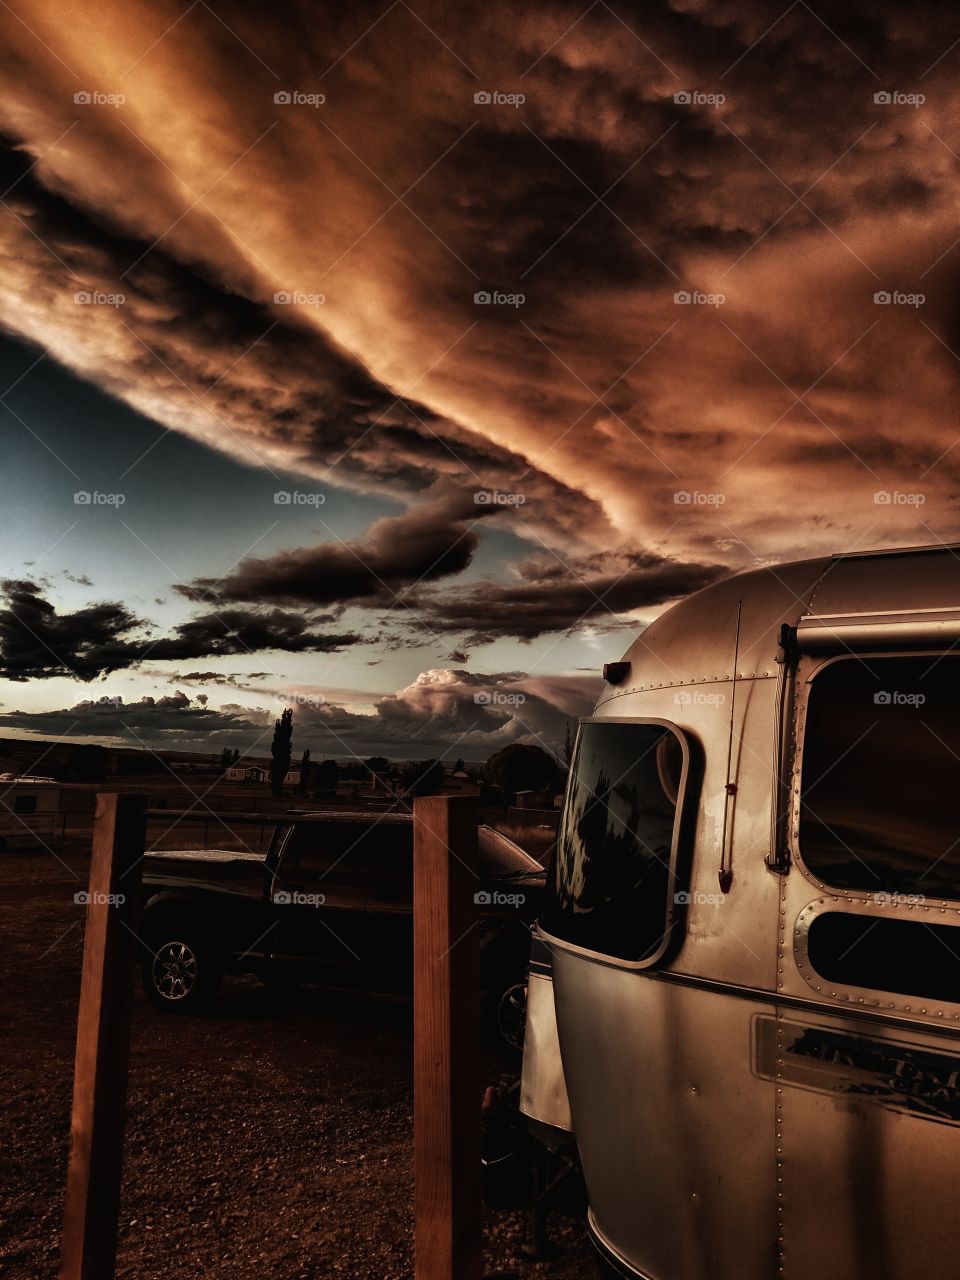 Vintage Airstream after the storm, under apocalyptic skies.